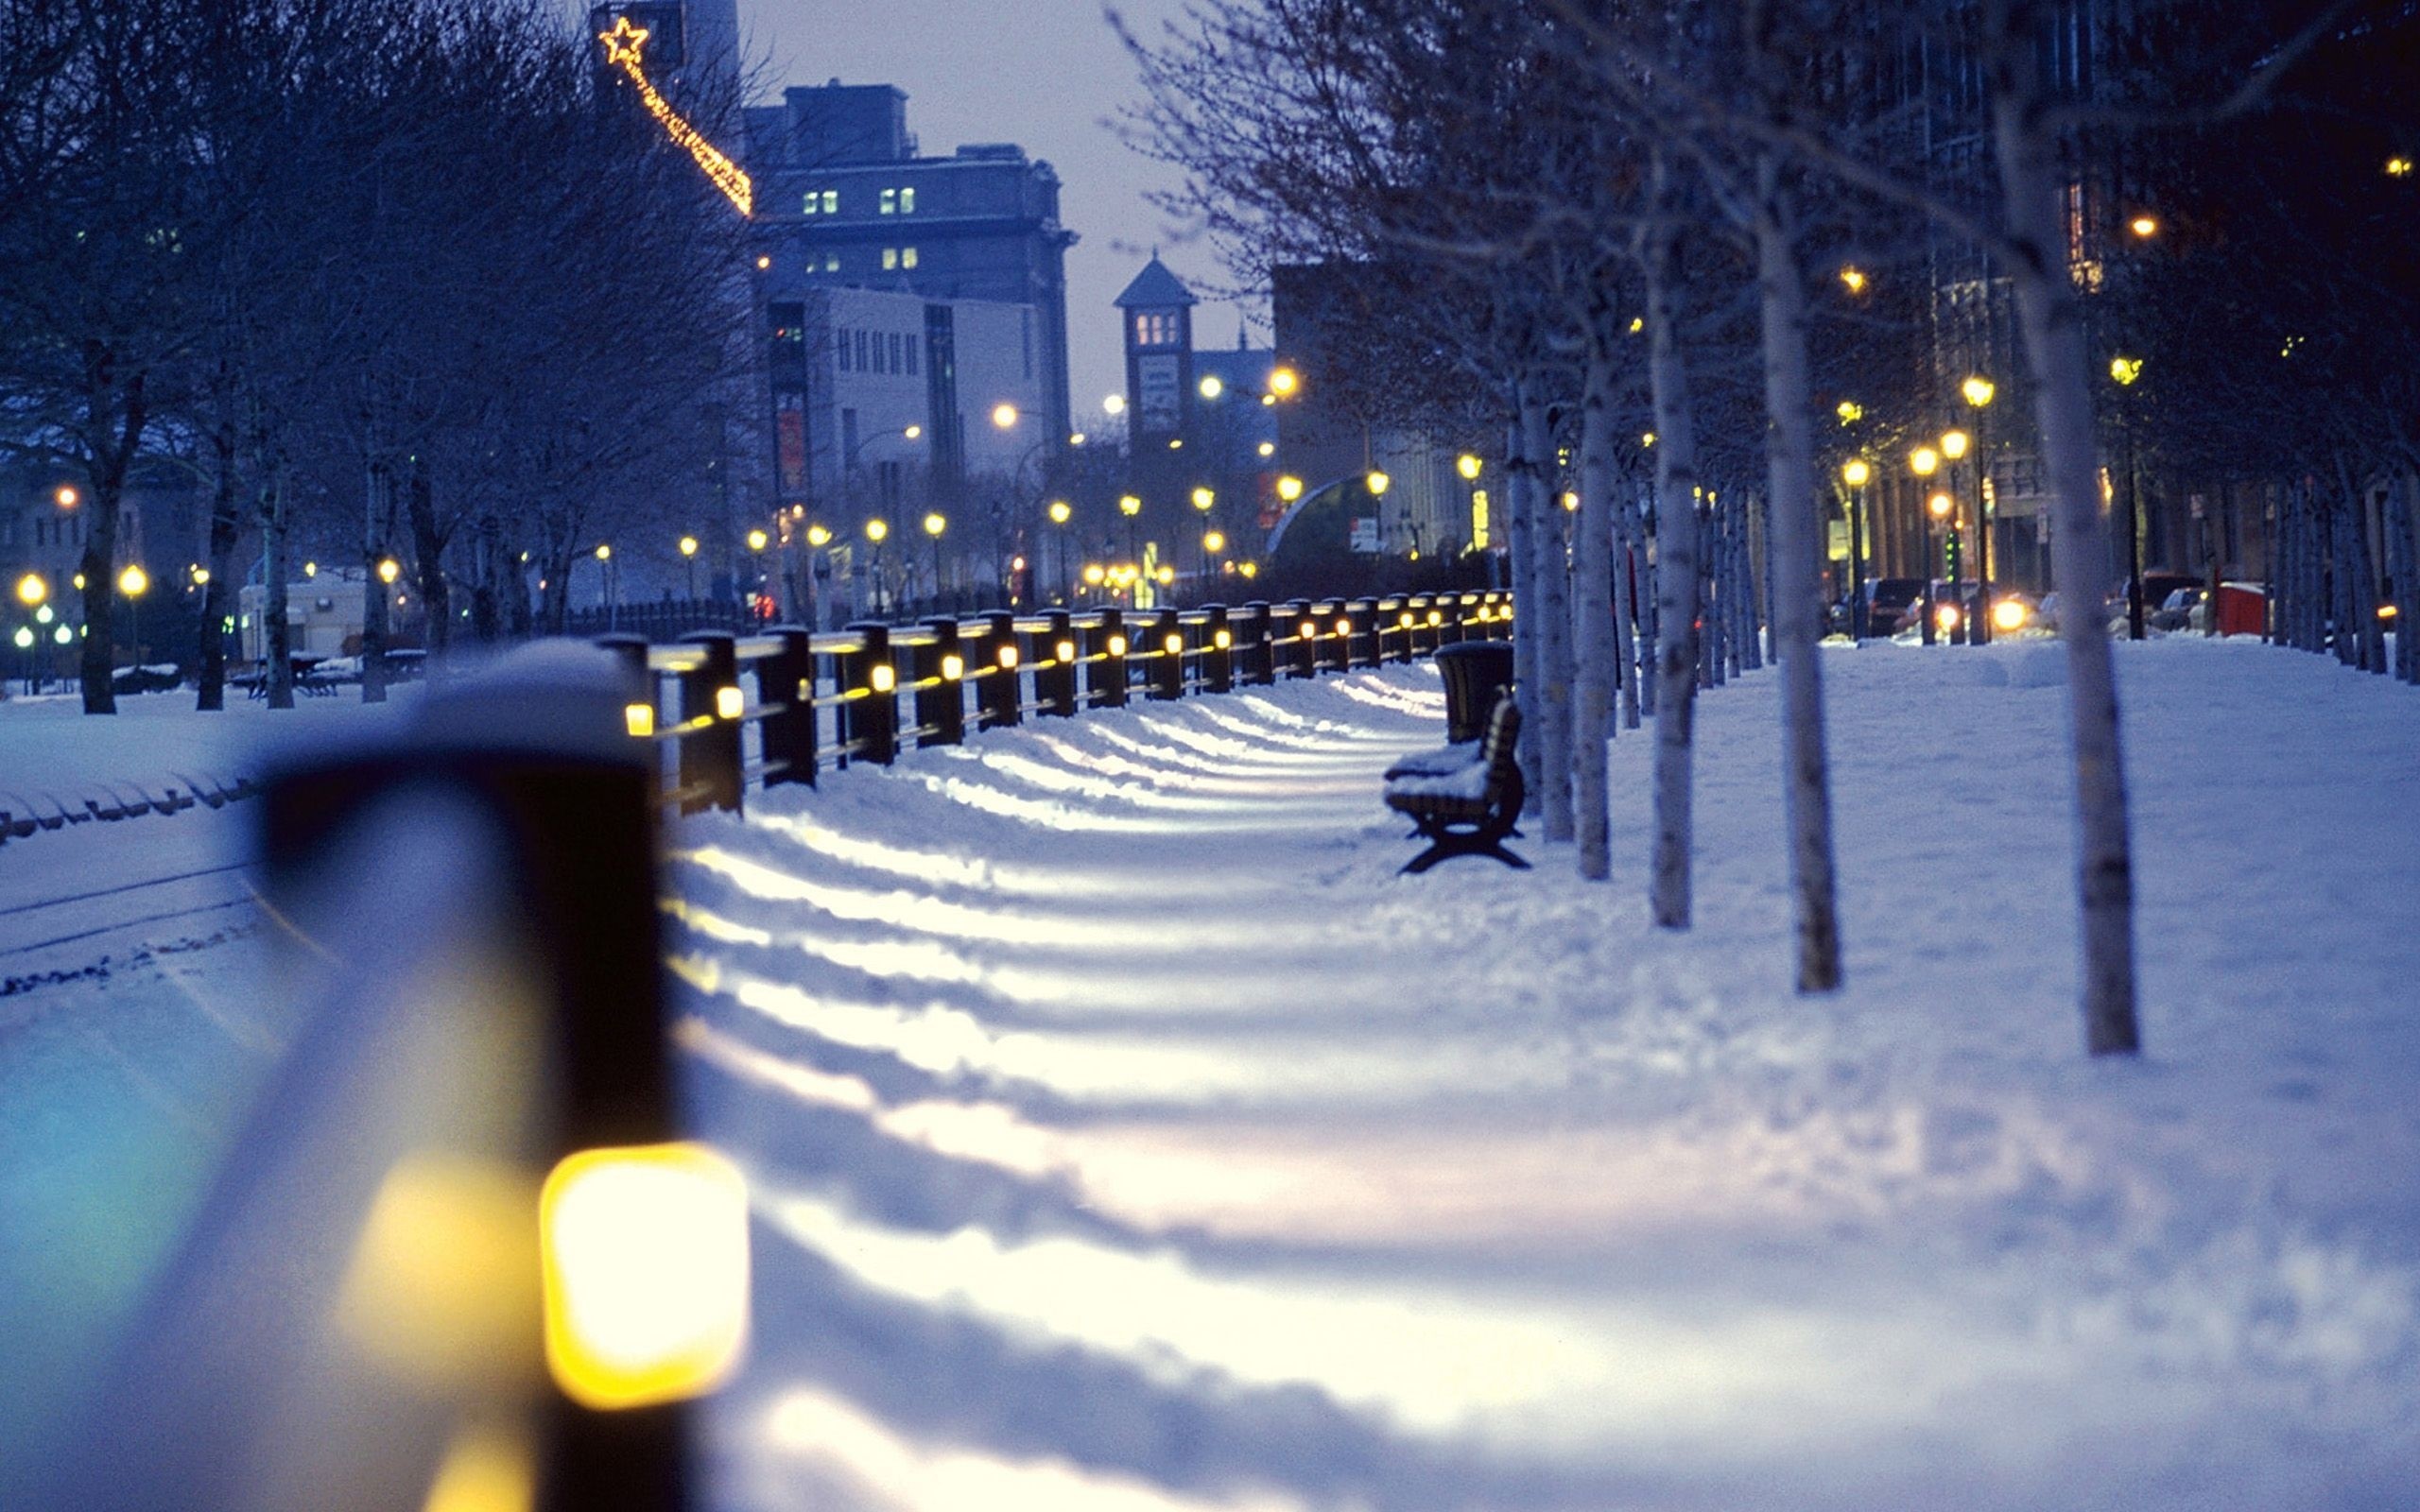 2560x1600 Title : winter hd wallpapers group (87+). Dimension : 2560 x 1600. File  Type : JPG/JPEG